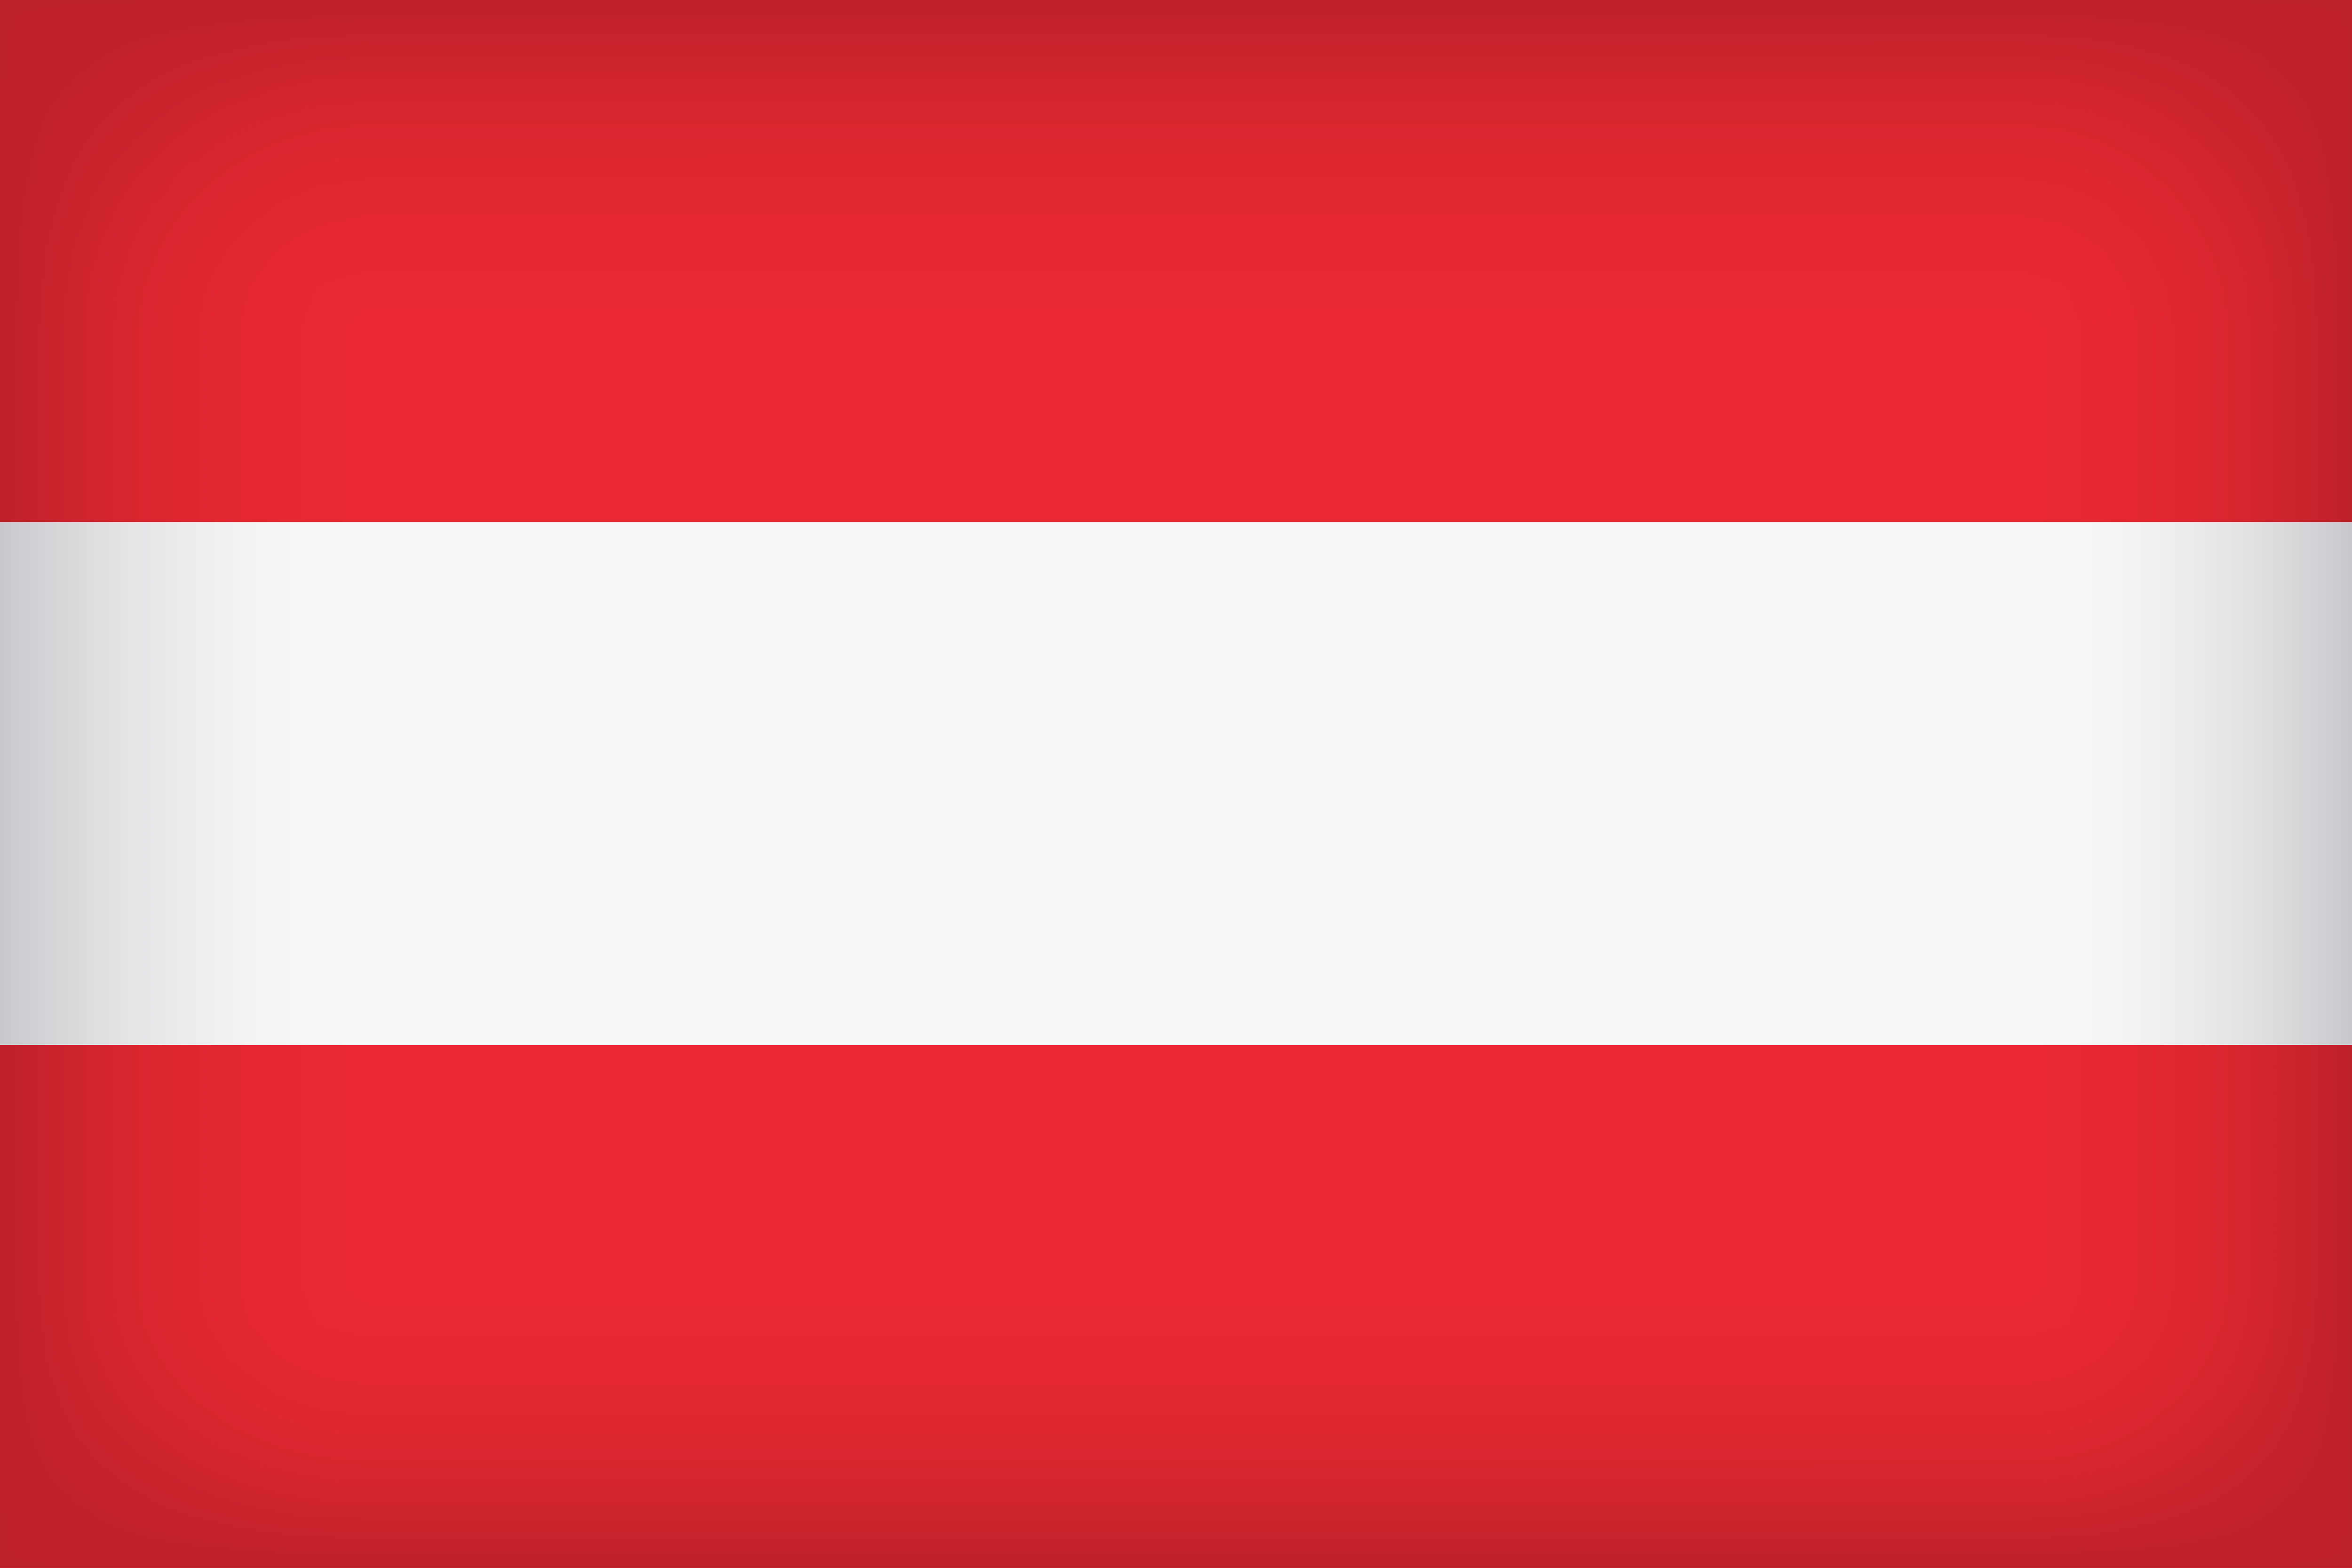 Austria Large Flag | Gallery Yopriceville - High-Quality Images and Transparent PNG ...5000 x 3333